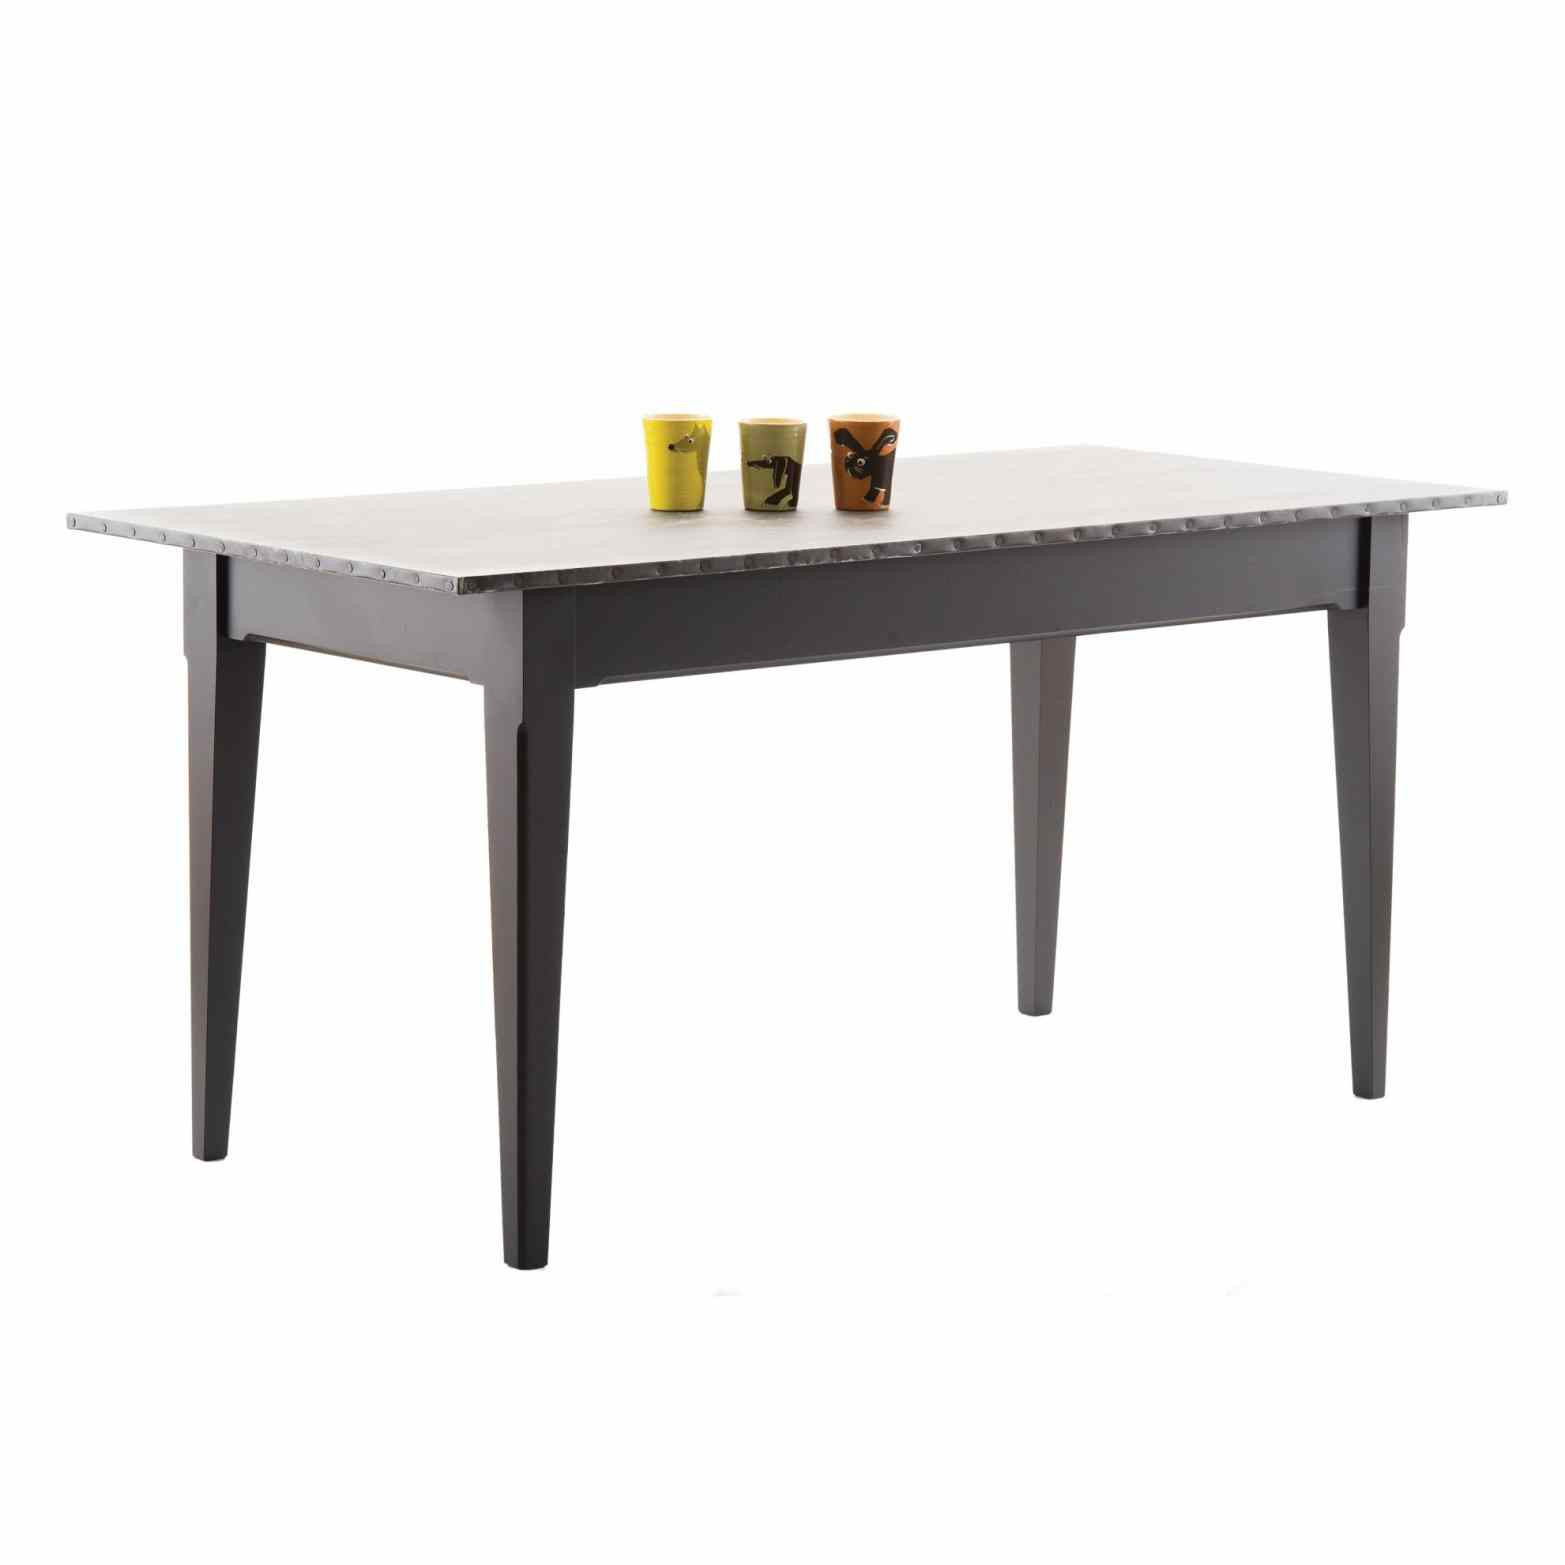 Small Rectangular Kitchen Table Sets
 Rustic Modern Dining Sets Contemporary Room Table Kitchen